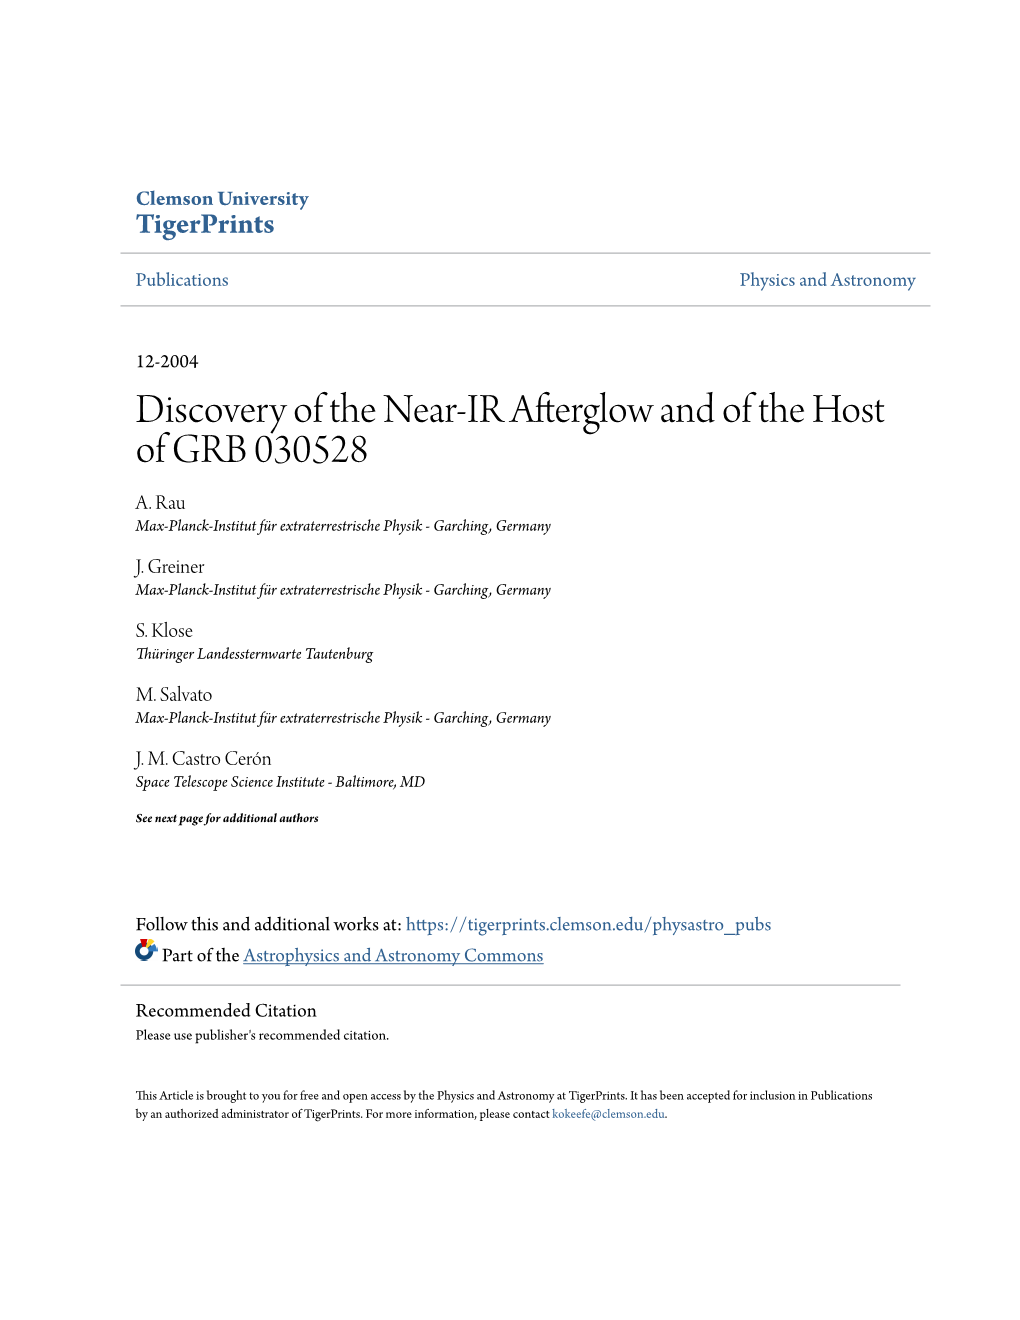 Discovery of the Near-IR Afterglow and of the Host of GRB 030528 A